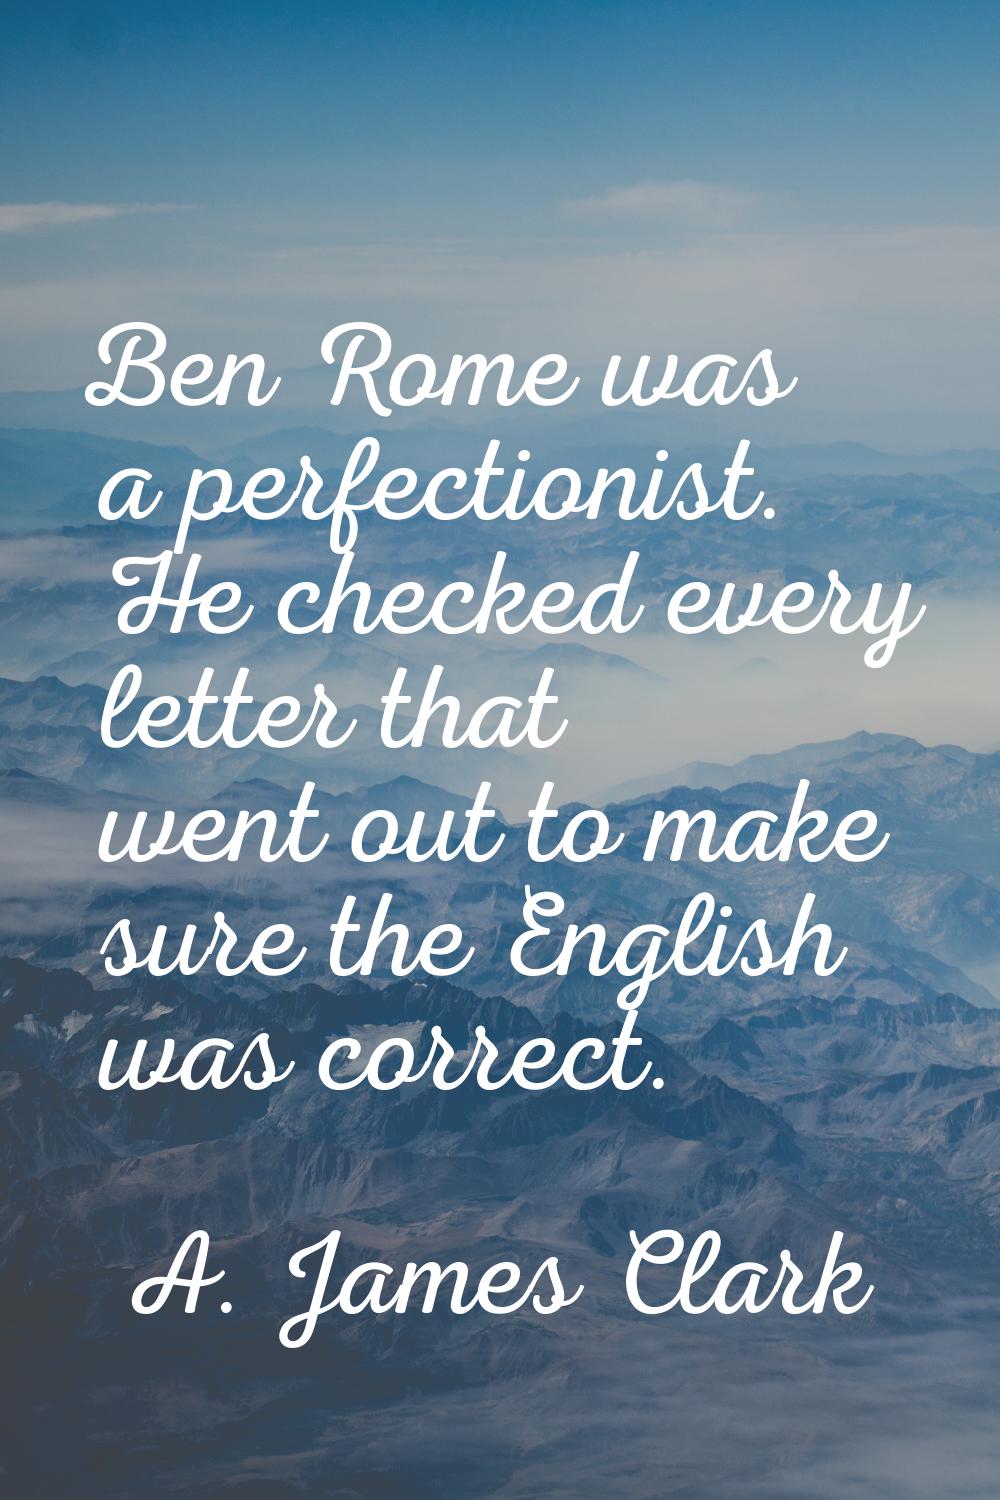 Ben Rome was a perfectionist. He checked every letter that went out to make sure the English was co